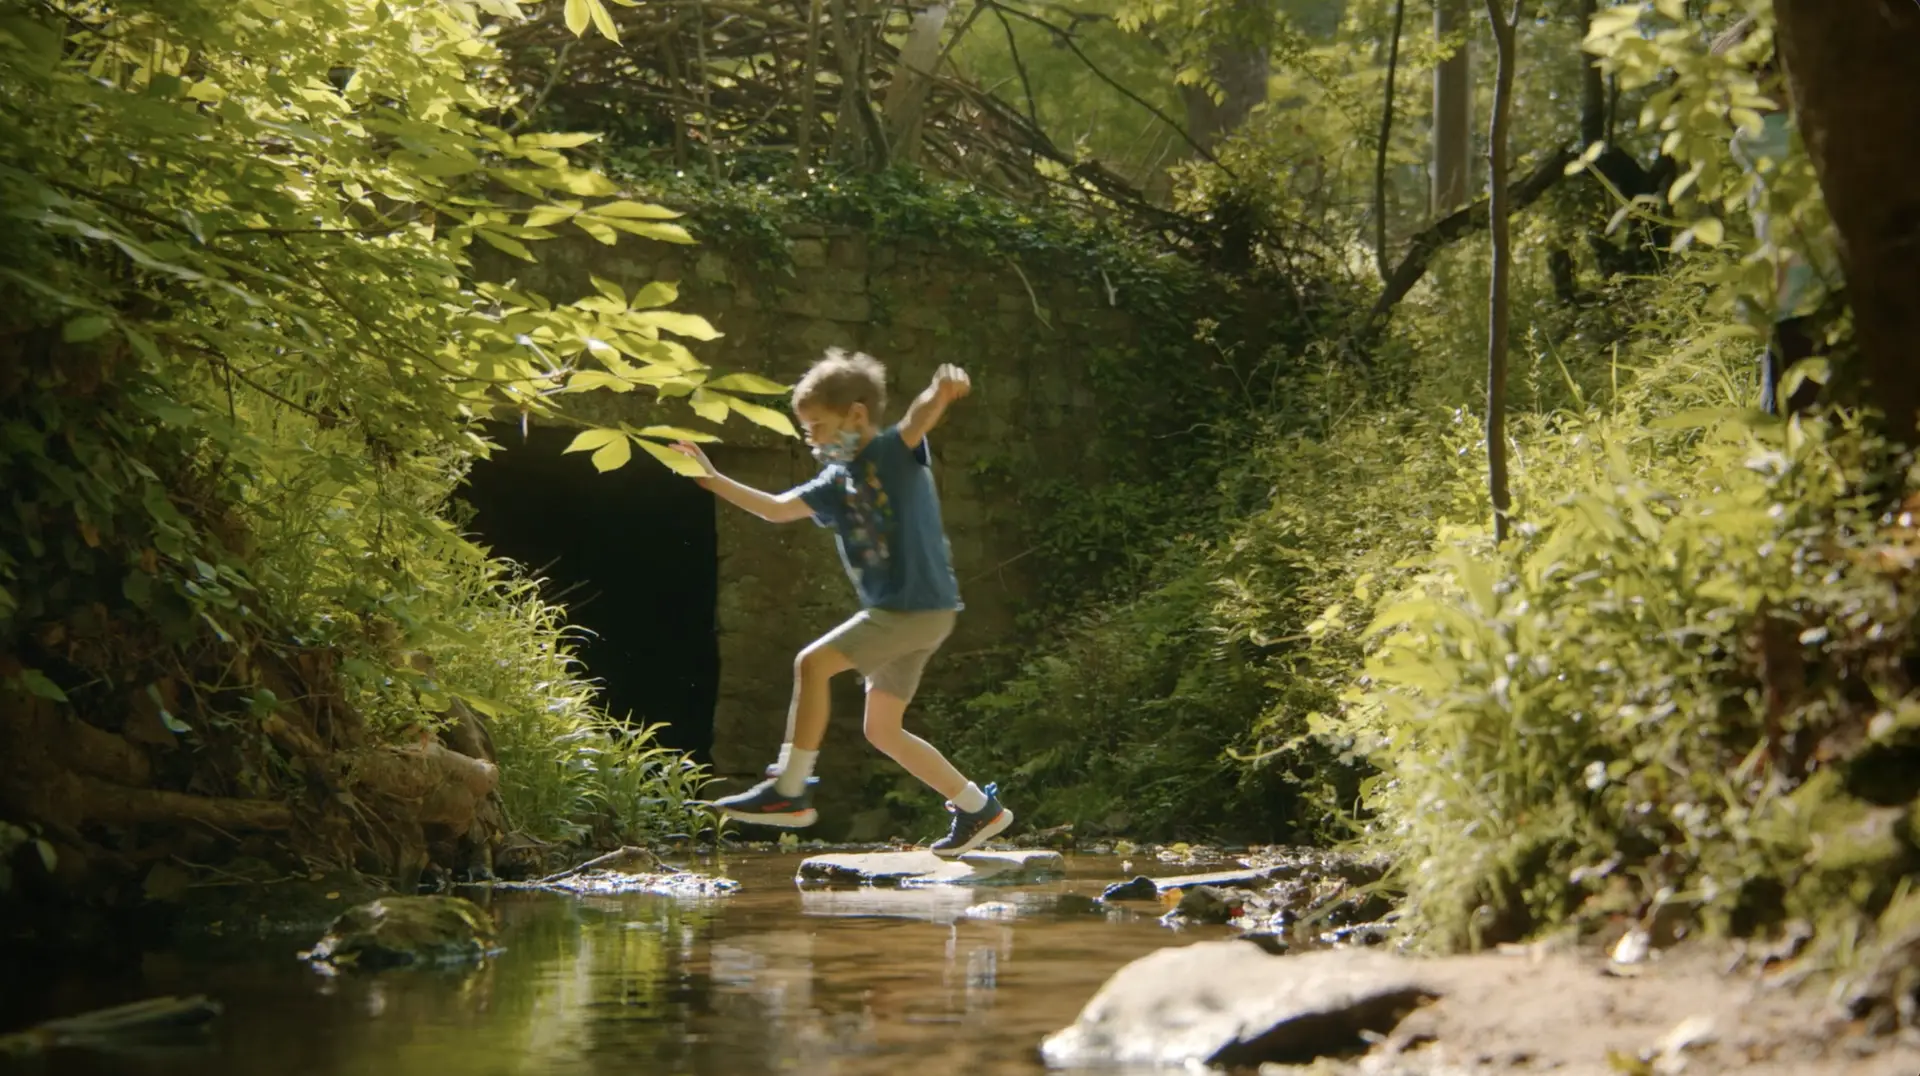 A boy jumps over a stream in the woods, an act seen in many stories.